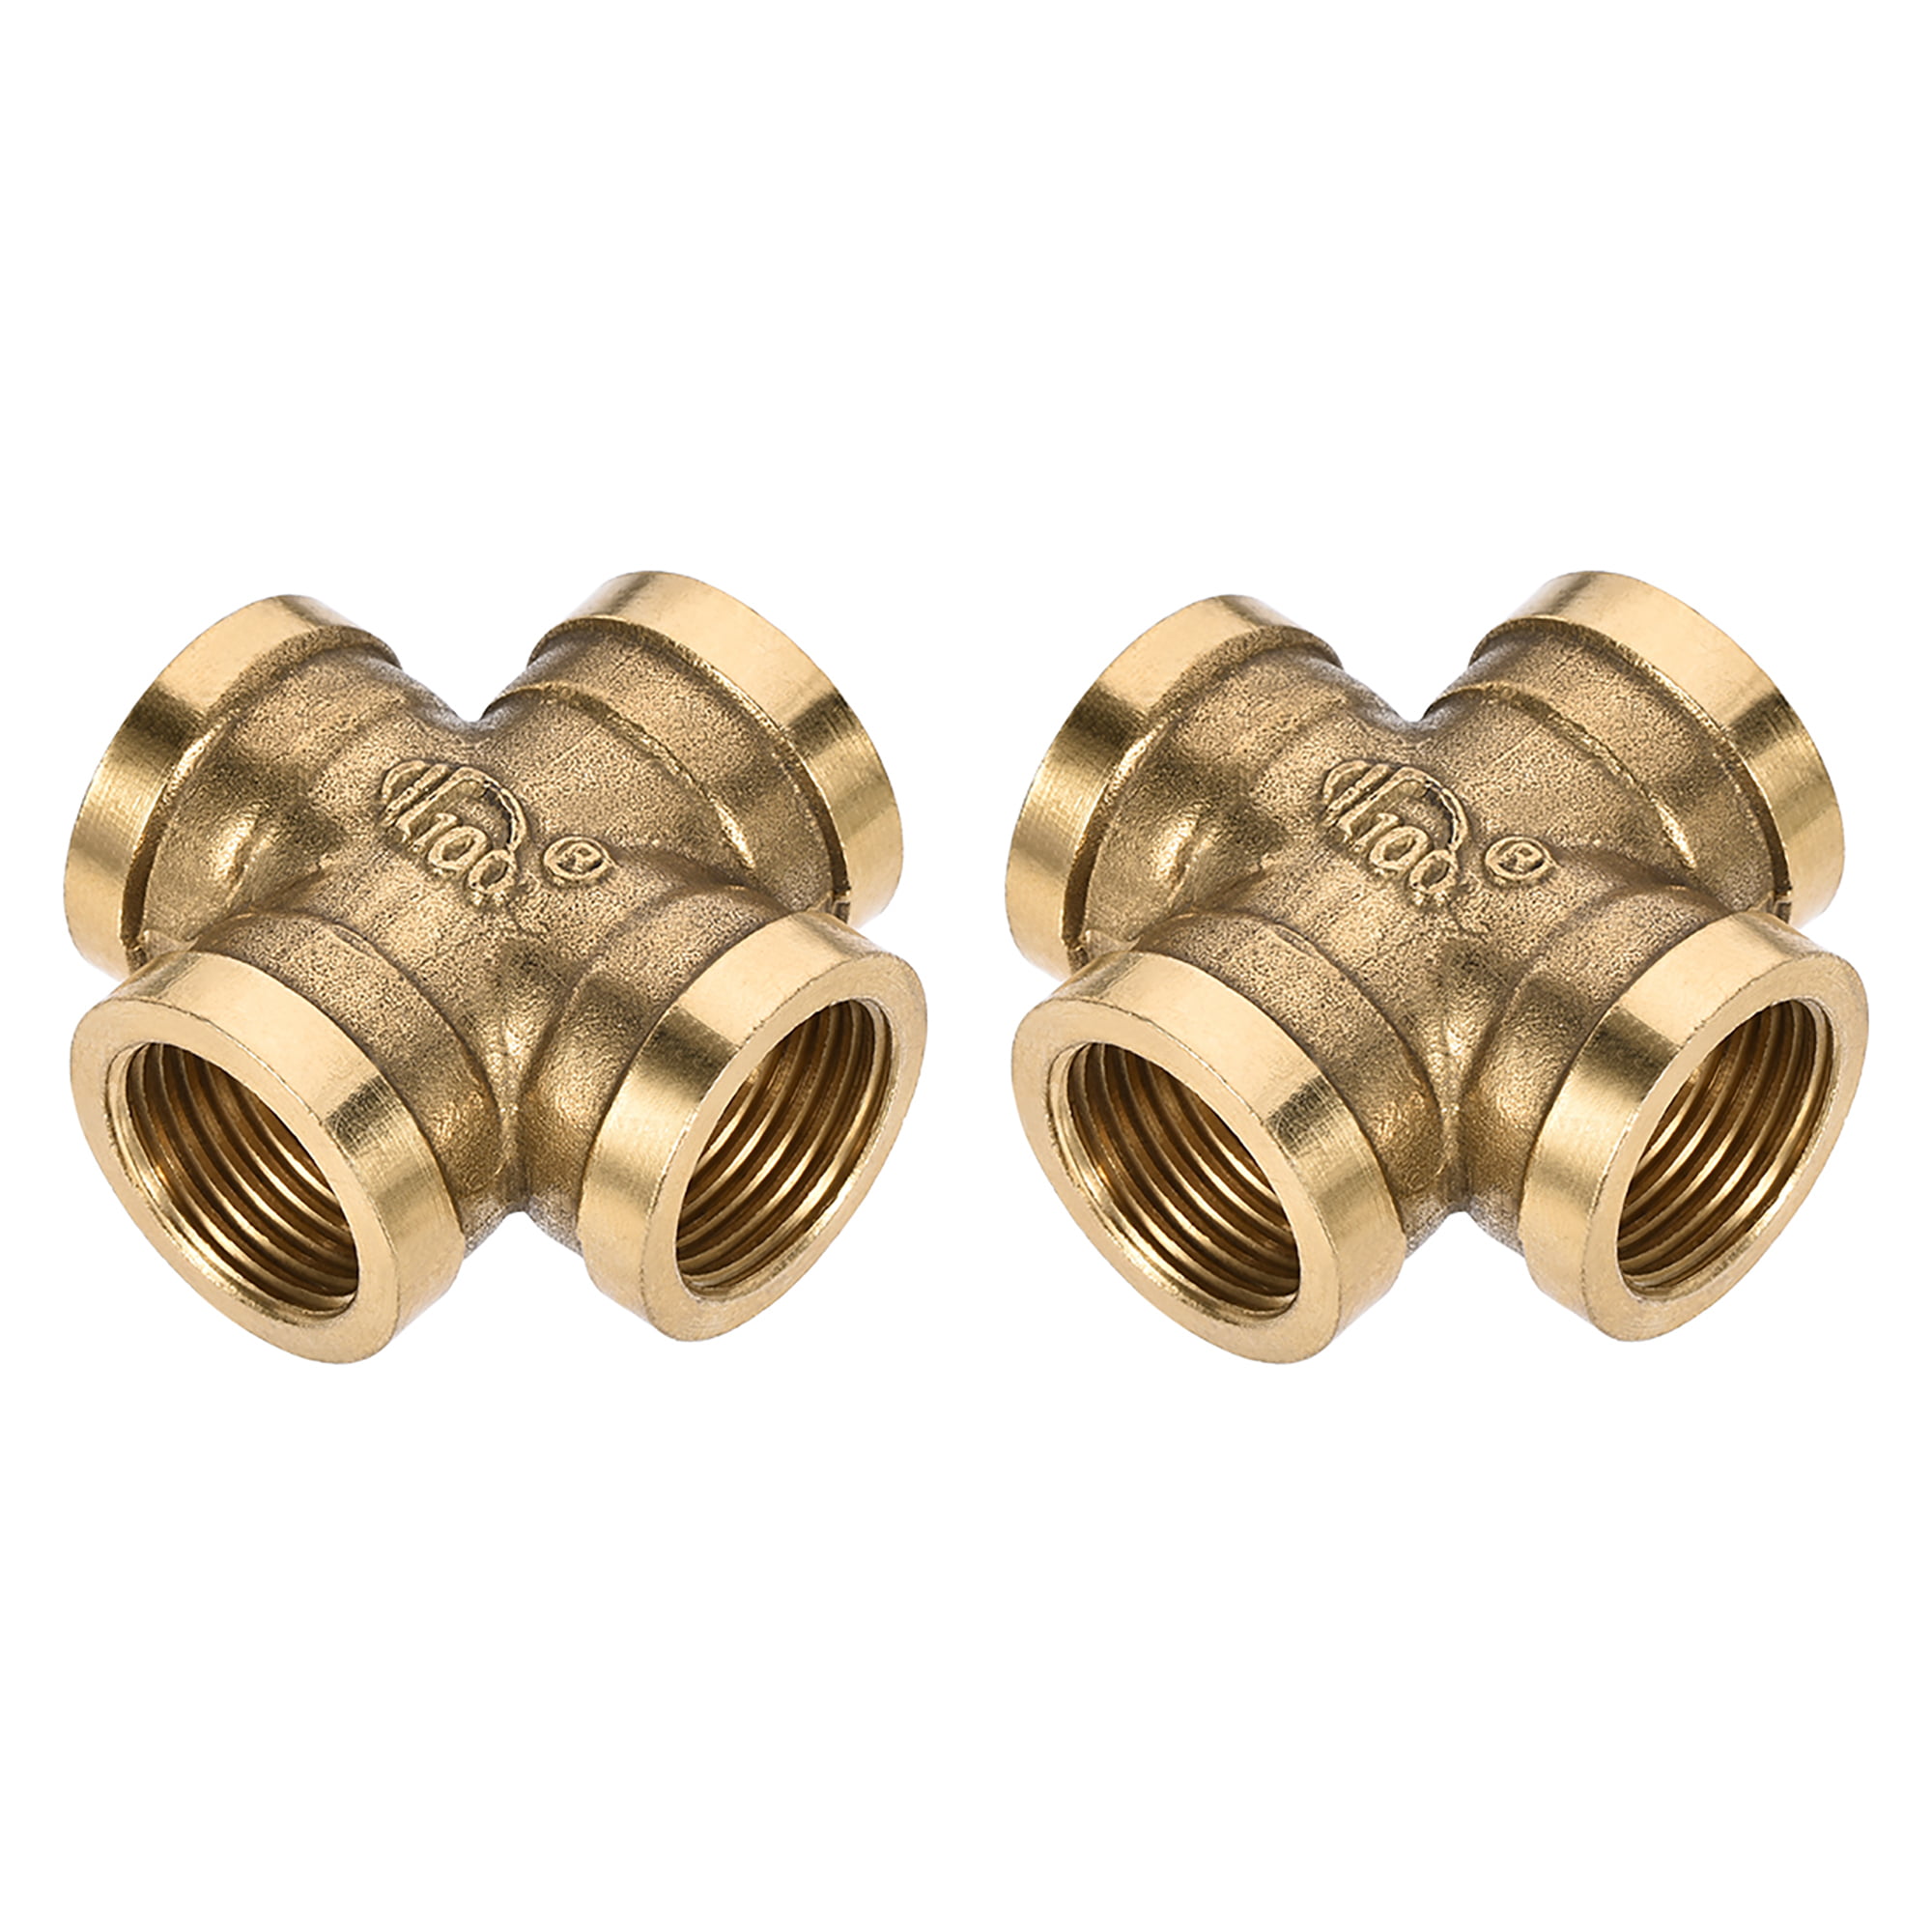 2 ways Elbow Brass Connector 1/8" BSP Male to Female Thread Pipe Coupler 2 PCS 